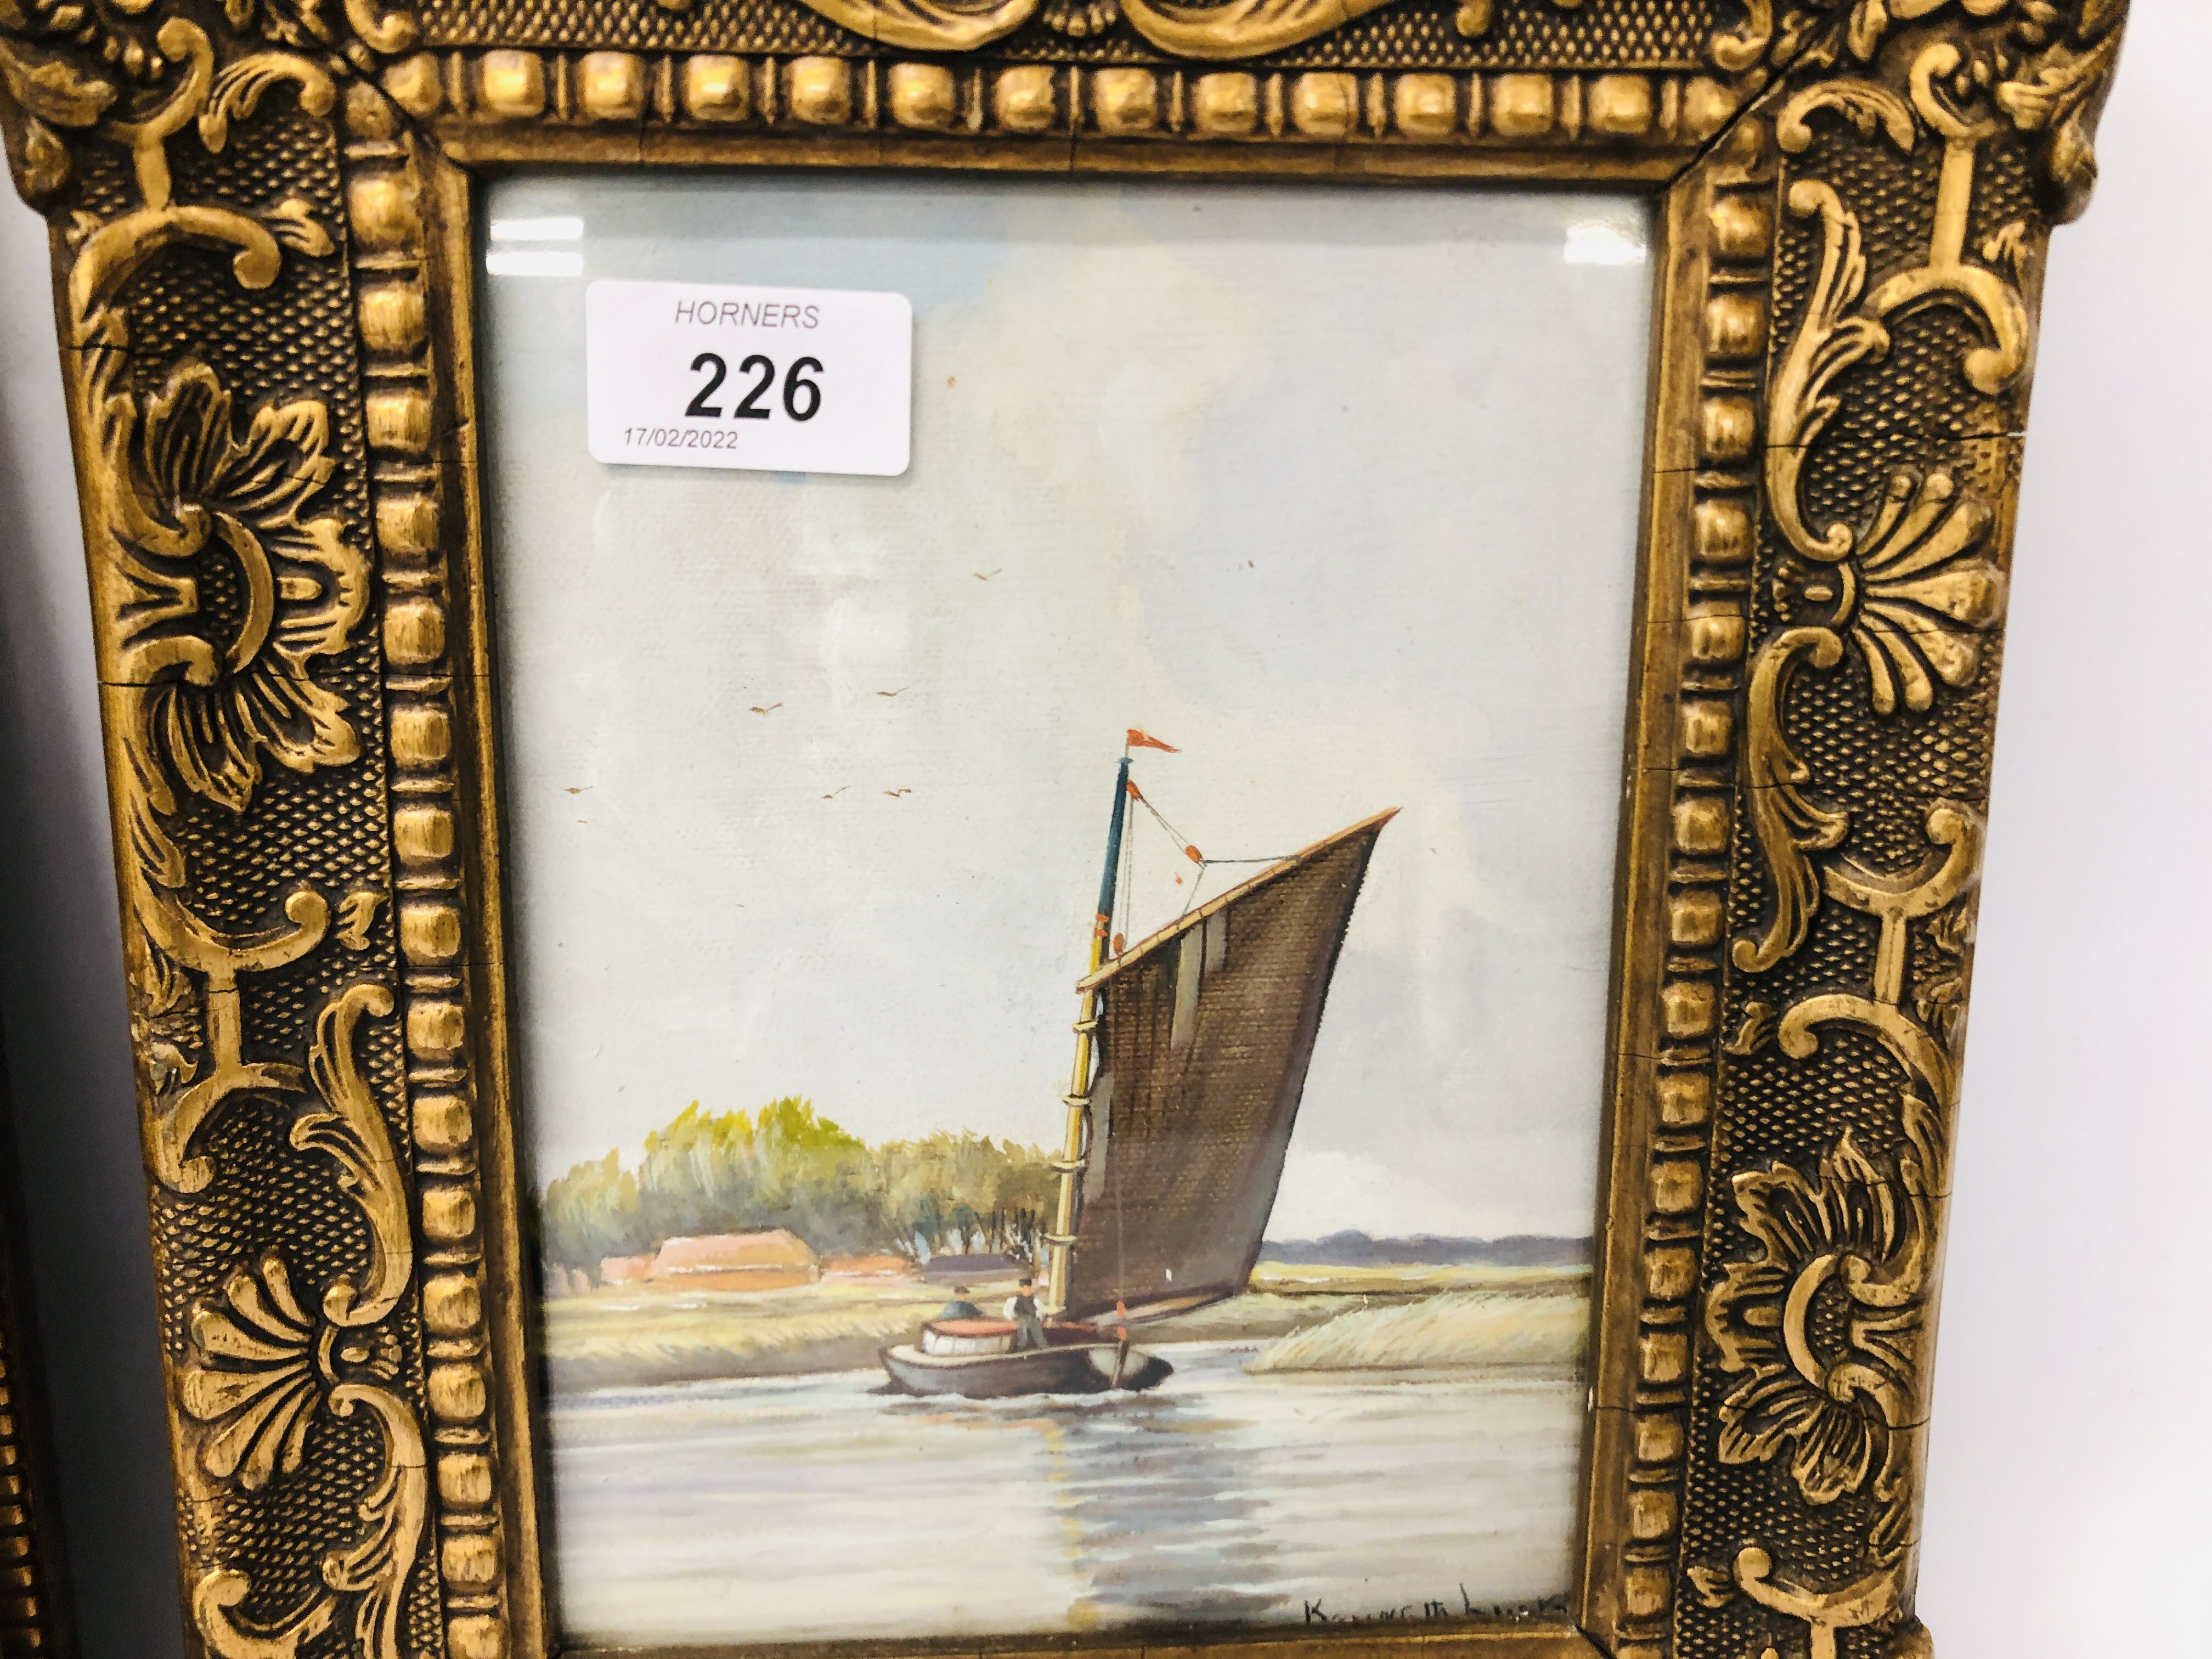 PAIR OF GILT FRAMED OIL ON BOARDS NORFOLK WHERRIES BEARING SIGNATURE KENNETH LUCK - H 19CM X W 14CM. - Image 5 of 6